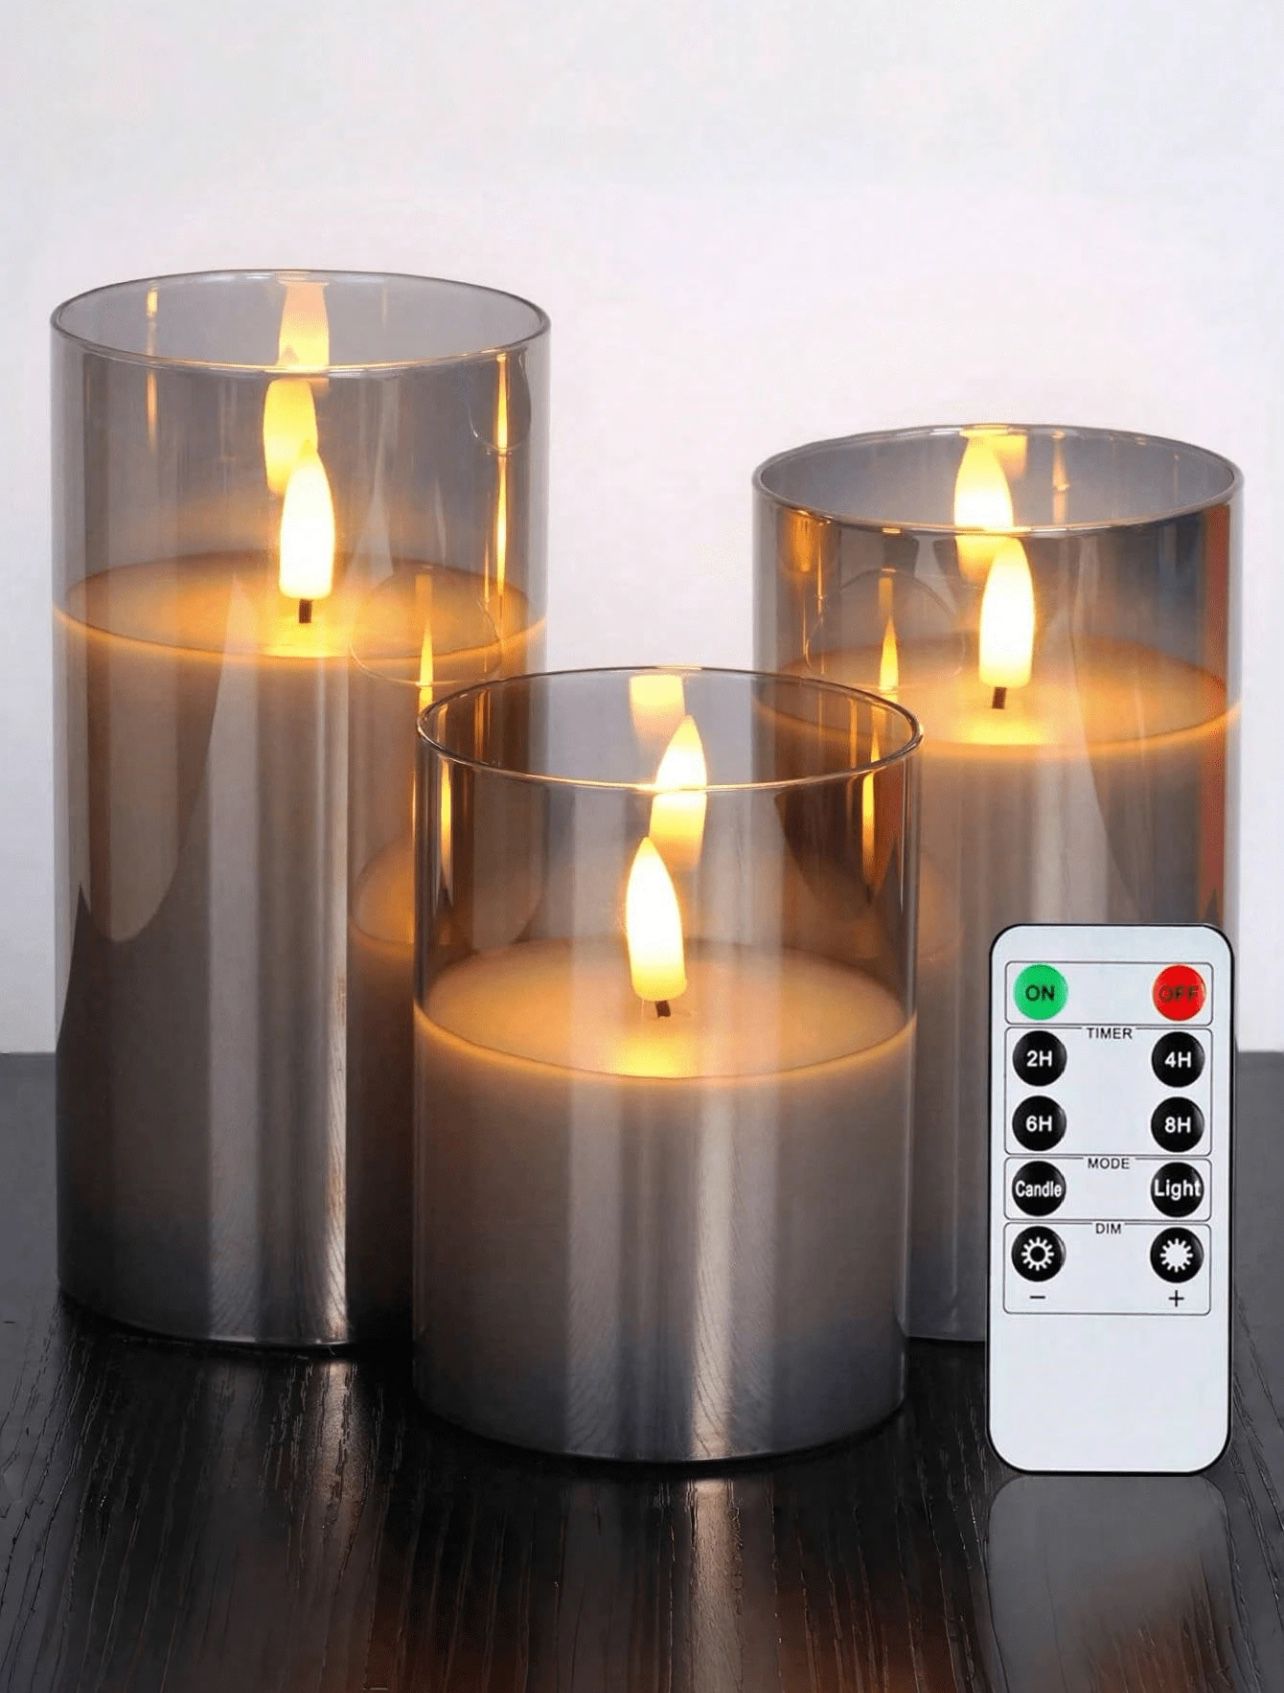 Set Of 3 Remote & Timer Controlled Flickering Led Pillar Candles With Tear Drop Shaped Bulbs, Battery Operated Electronic Candle